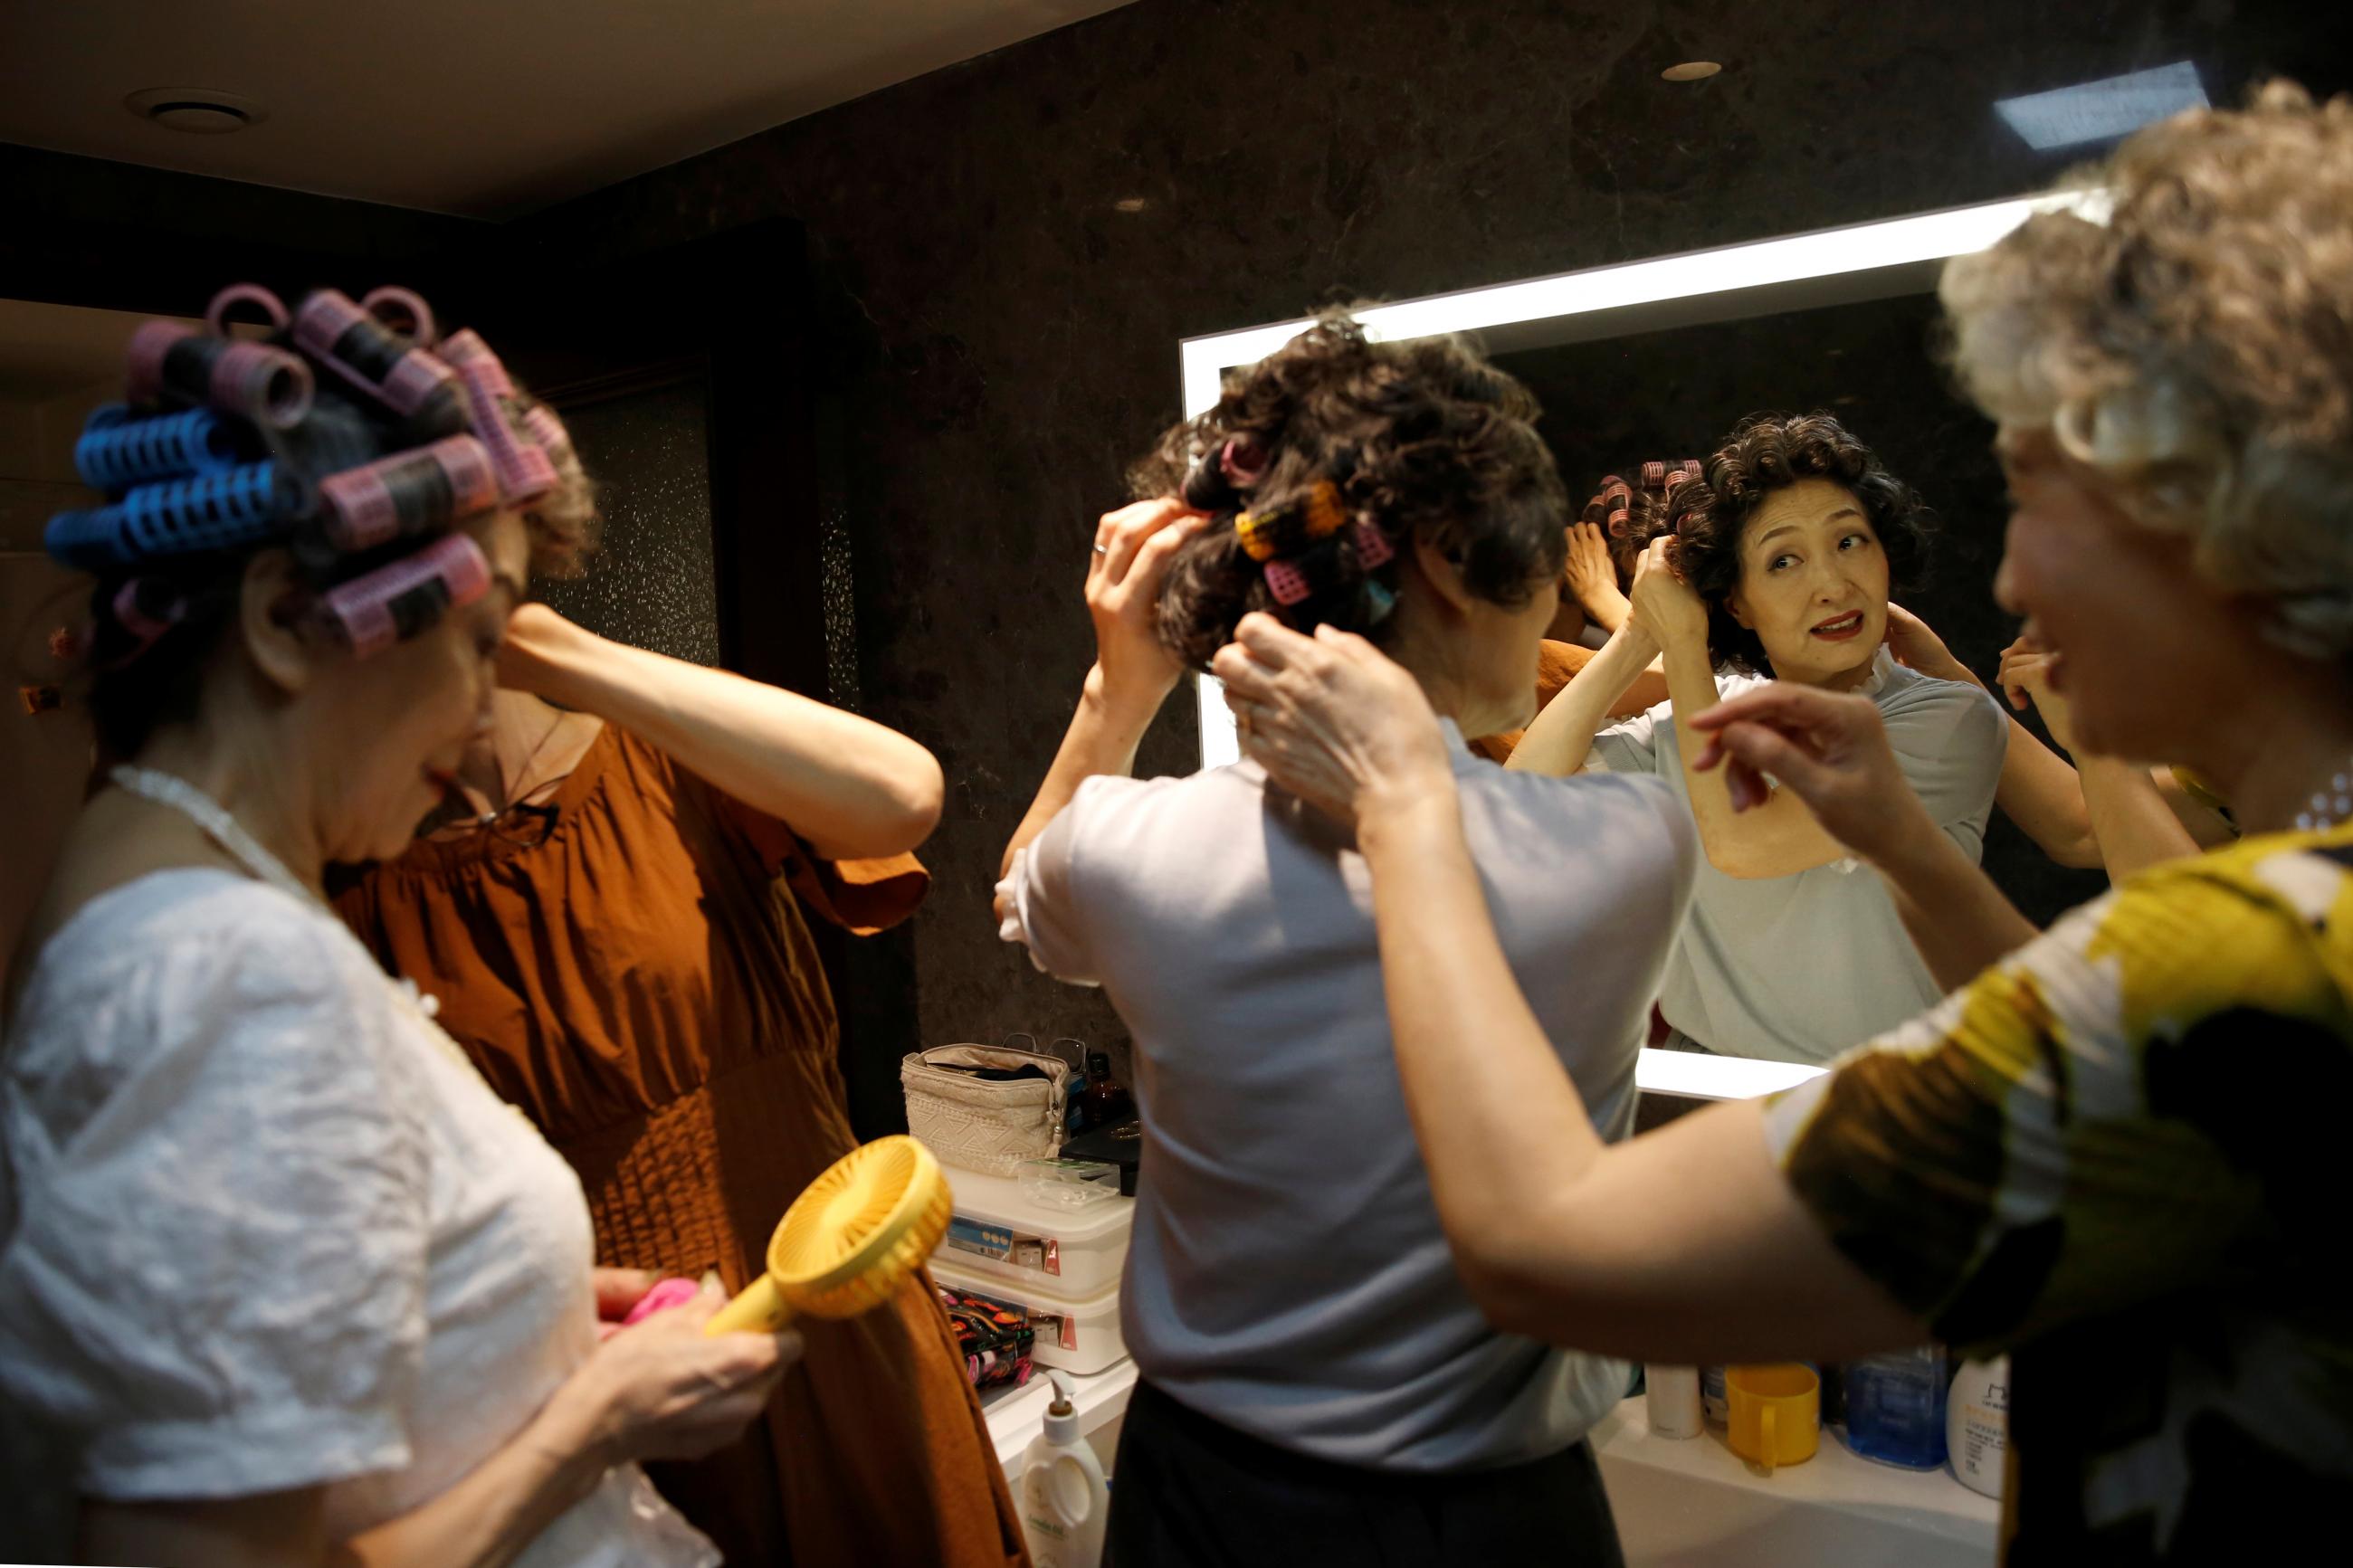 A group of older ladies prepare their hair in a mirror in preparation for a video shooting